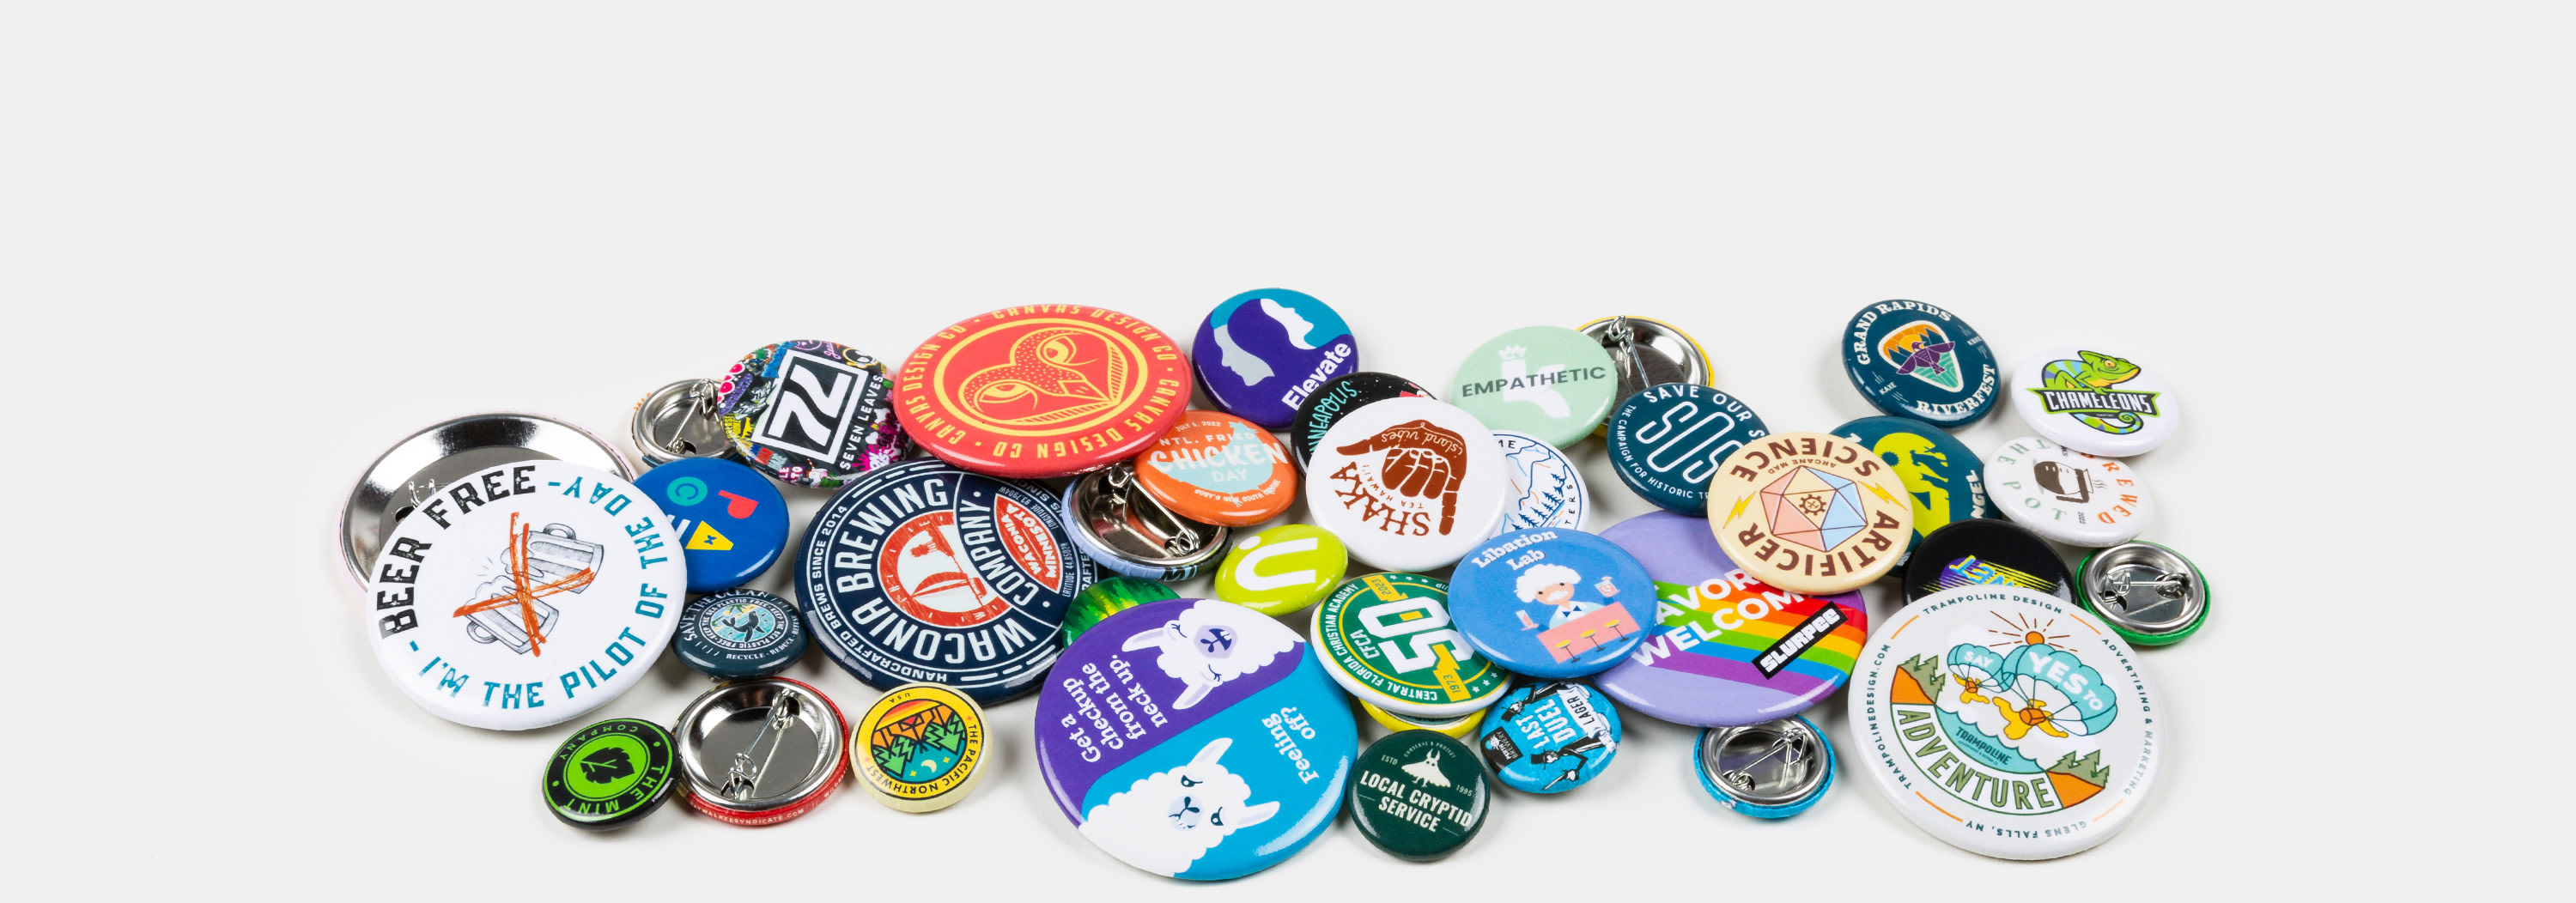 Promotional buttons